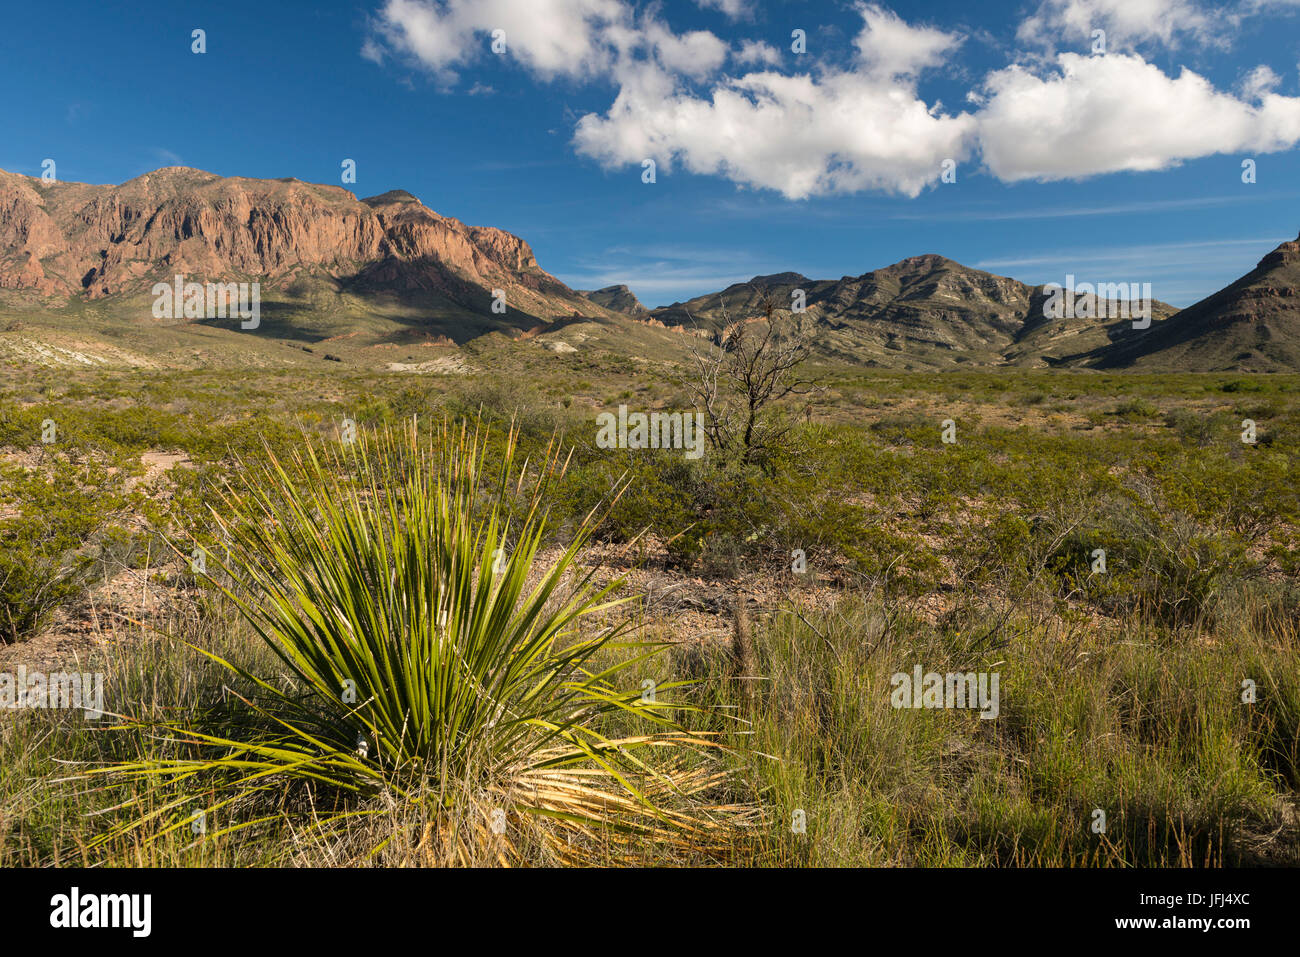 Wild scenery in the Big Bend national park, Texas, the USA Stock Photo